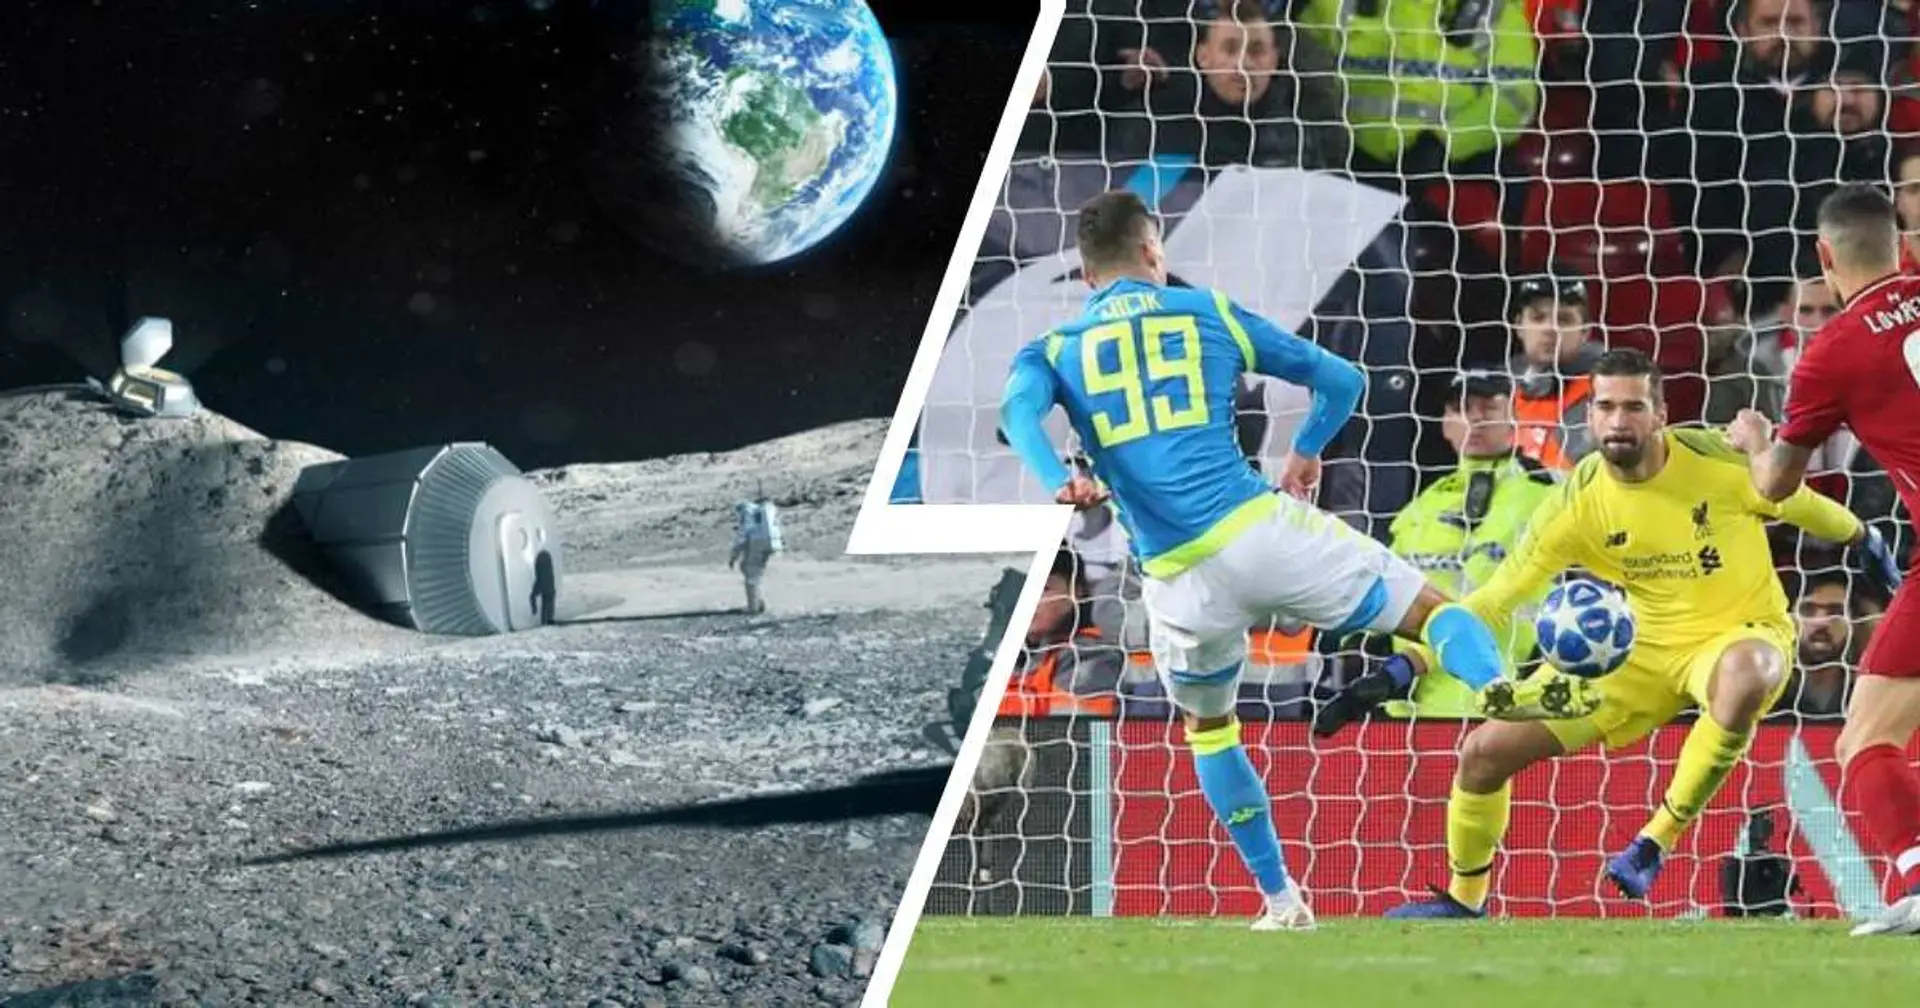 Astronauts may 'make cement using their own pee' – but Alisson's save vs Napoli will still be more impressive